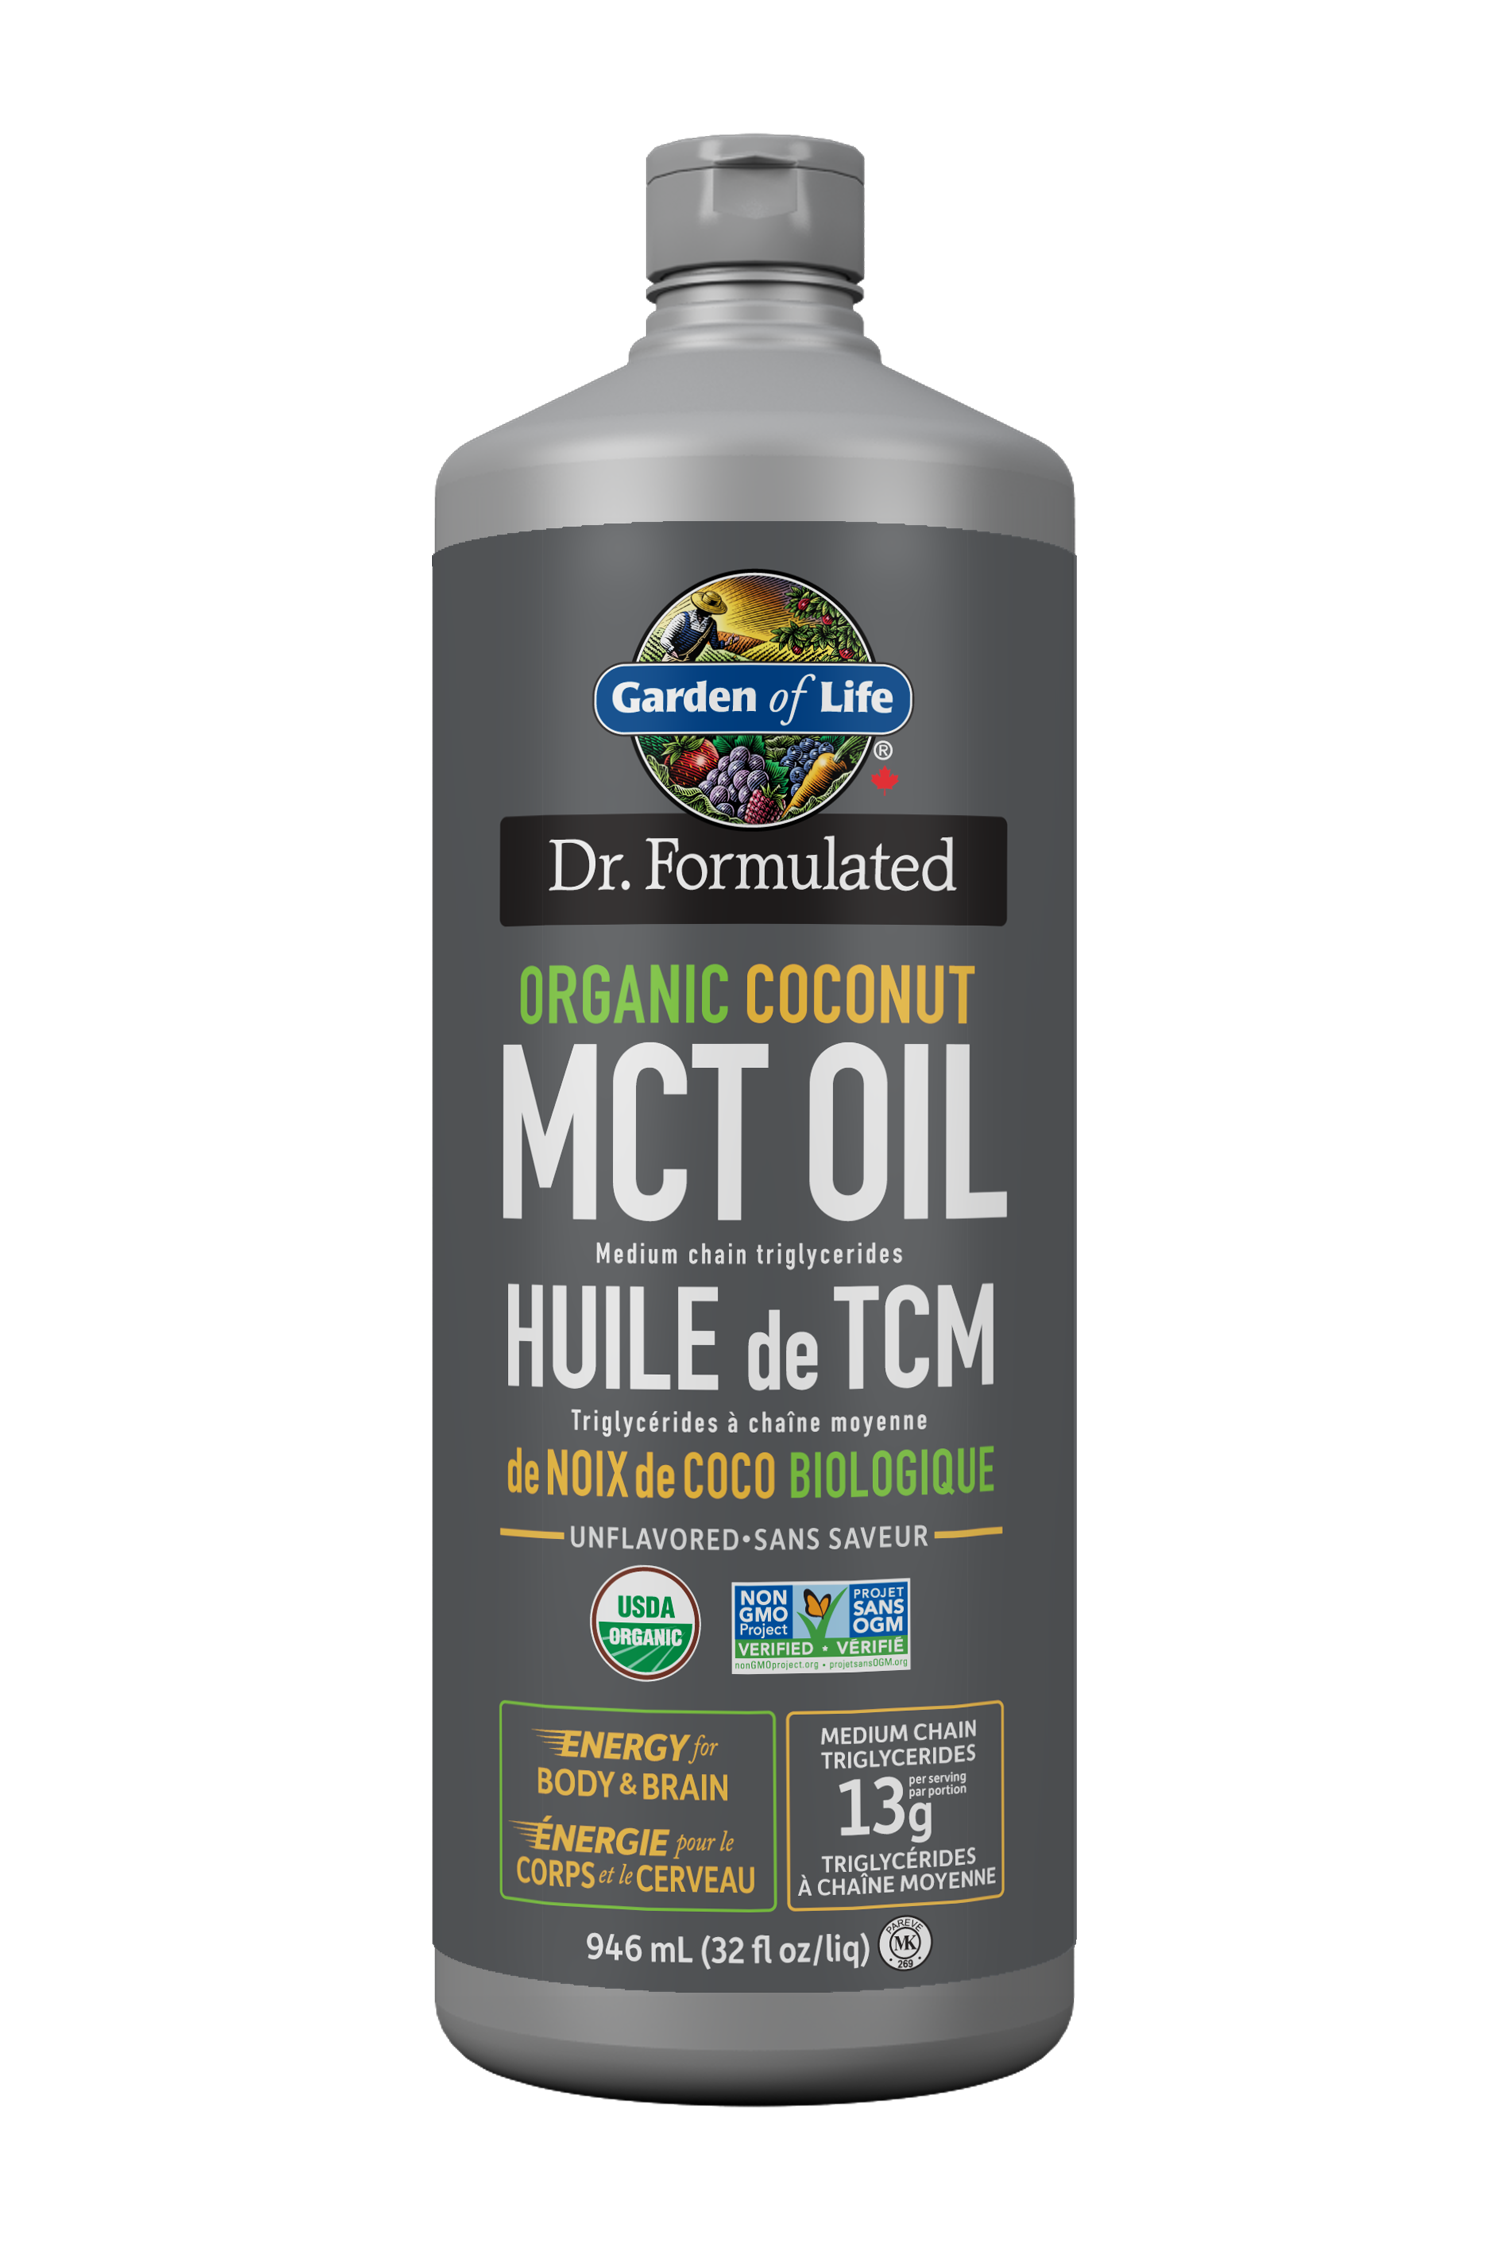 Garden of Life Dr. Formulated 100% Organic Coconut MCT Oil 946ml